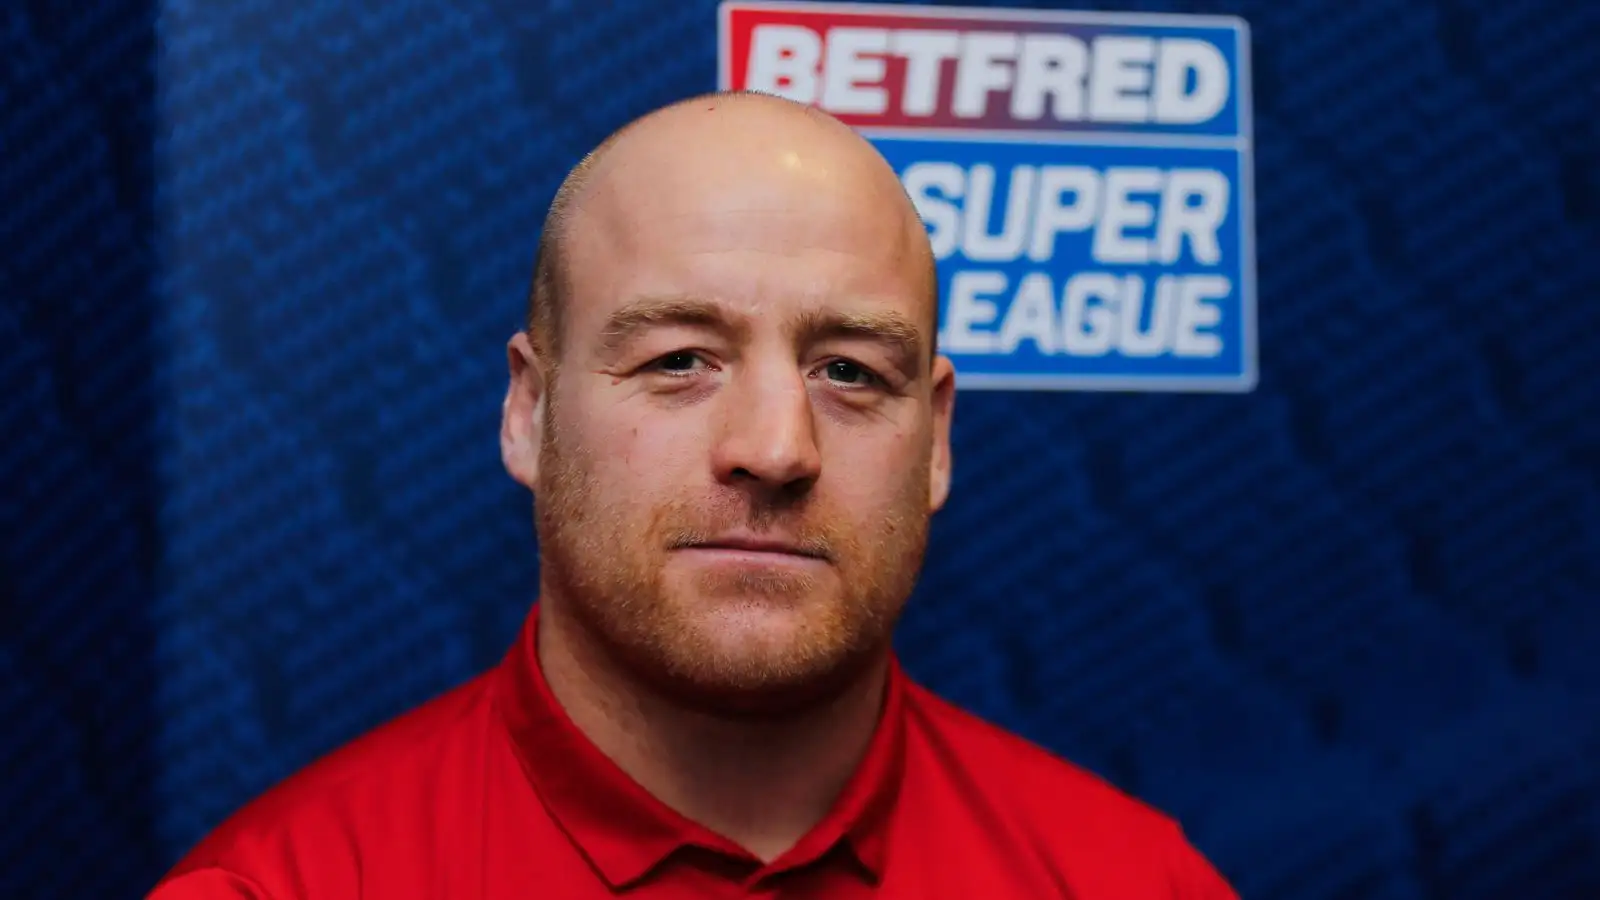 Castleford Tigers boss Danny Ward delivers verdict on Super League structure: ‘I’m not a fan of promotion and relegation, but I get why we have it’